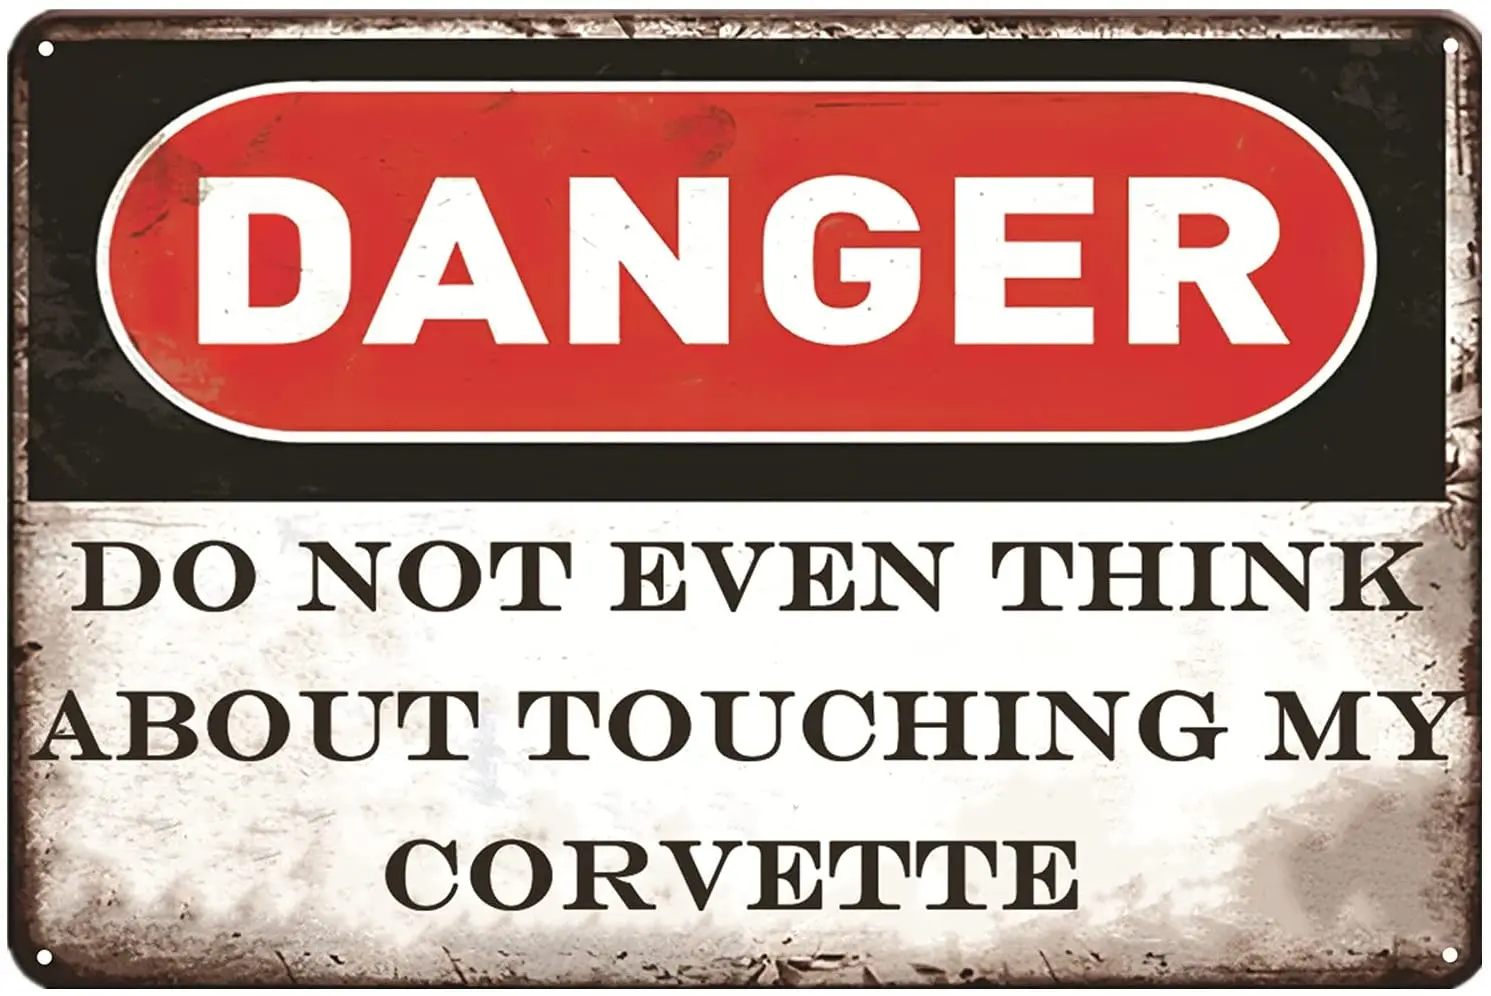 

CWEIDP Corvette Signs Garage Metal Sign Garage Signs for Men Vintage Wall Decor Do Not Touch My Corvette 8x12 Inch